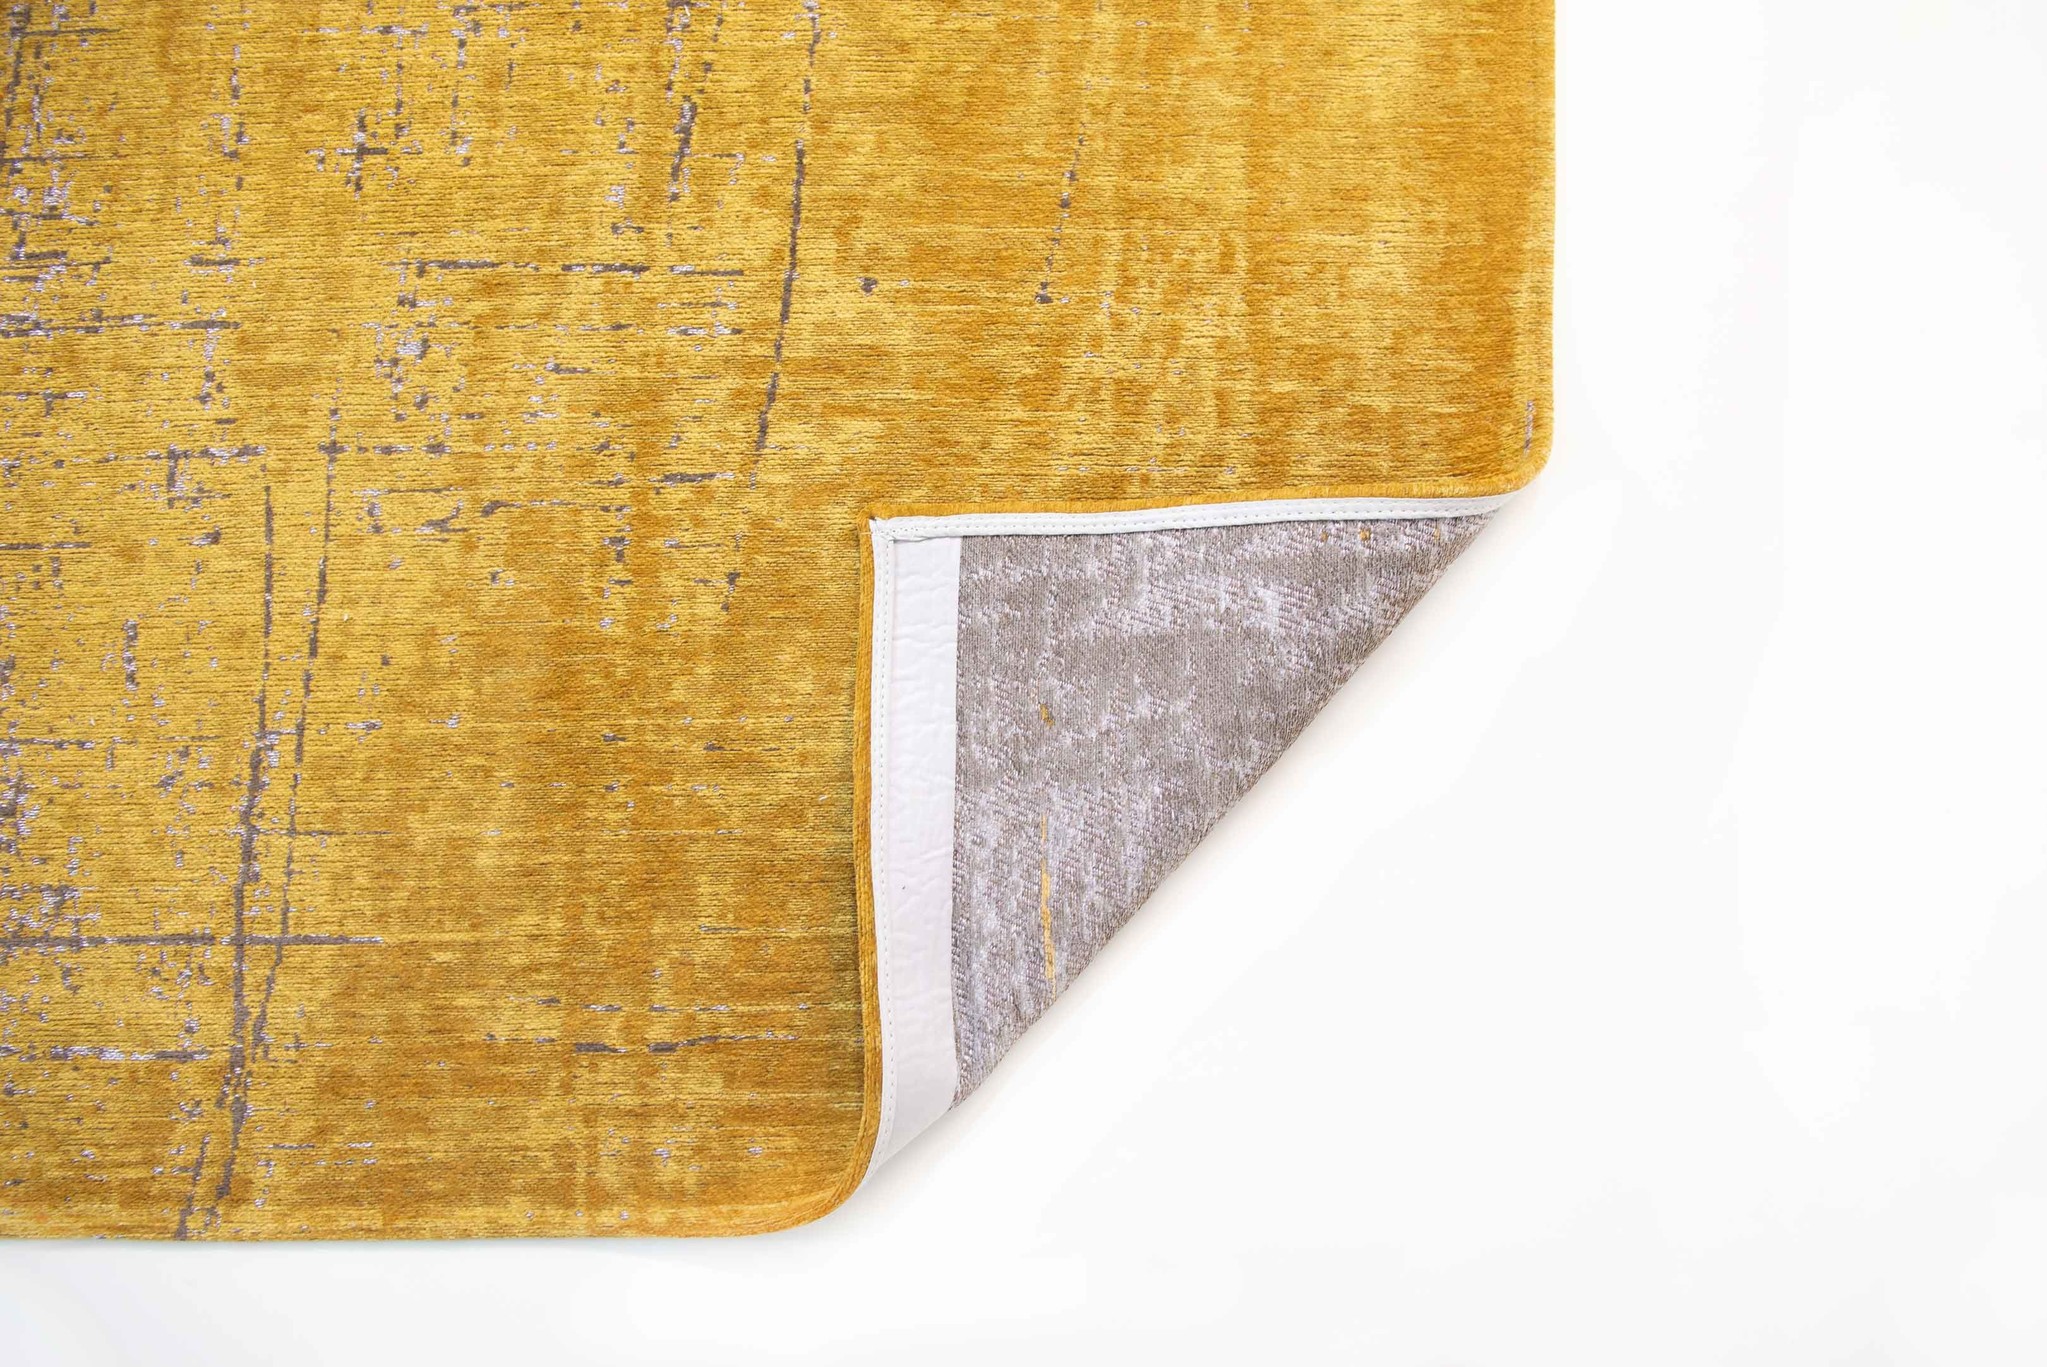 Abstract Gold Belgian Rug